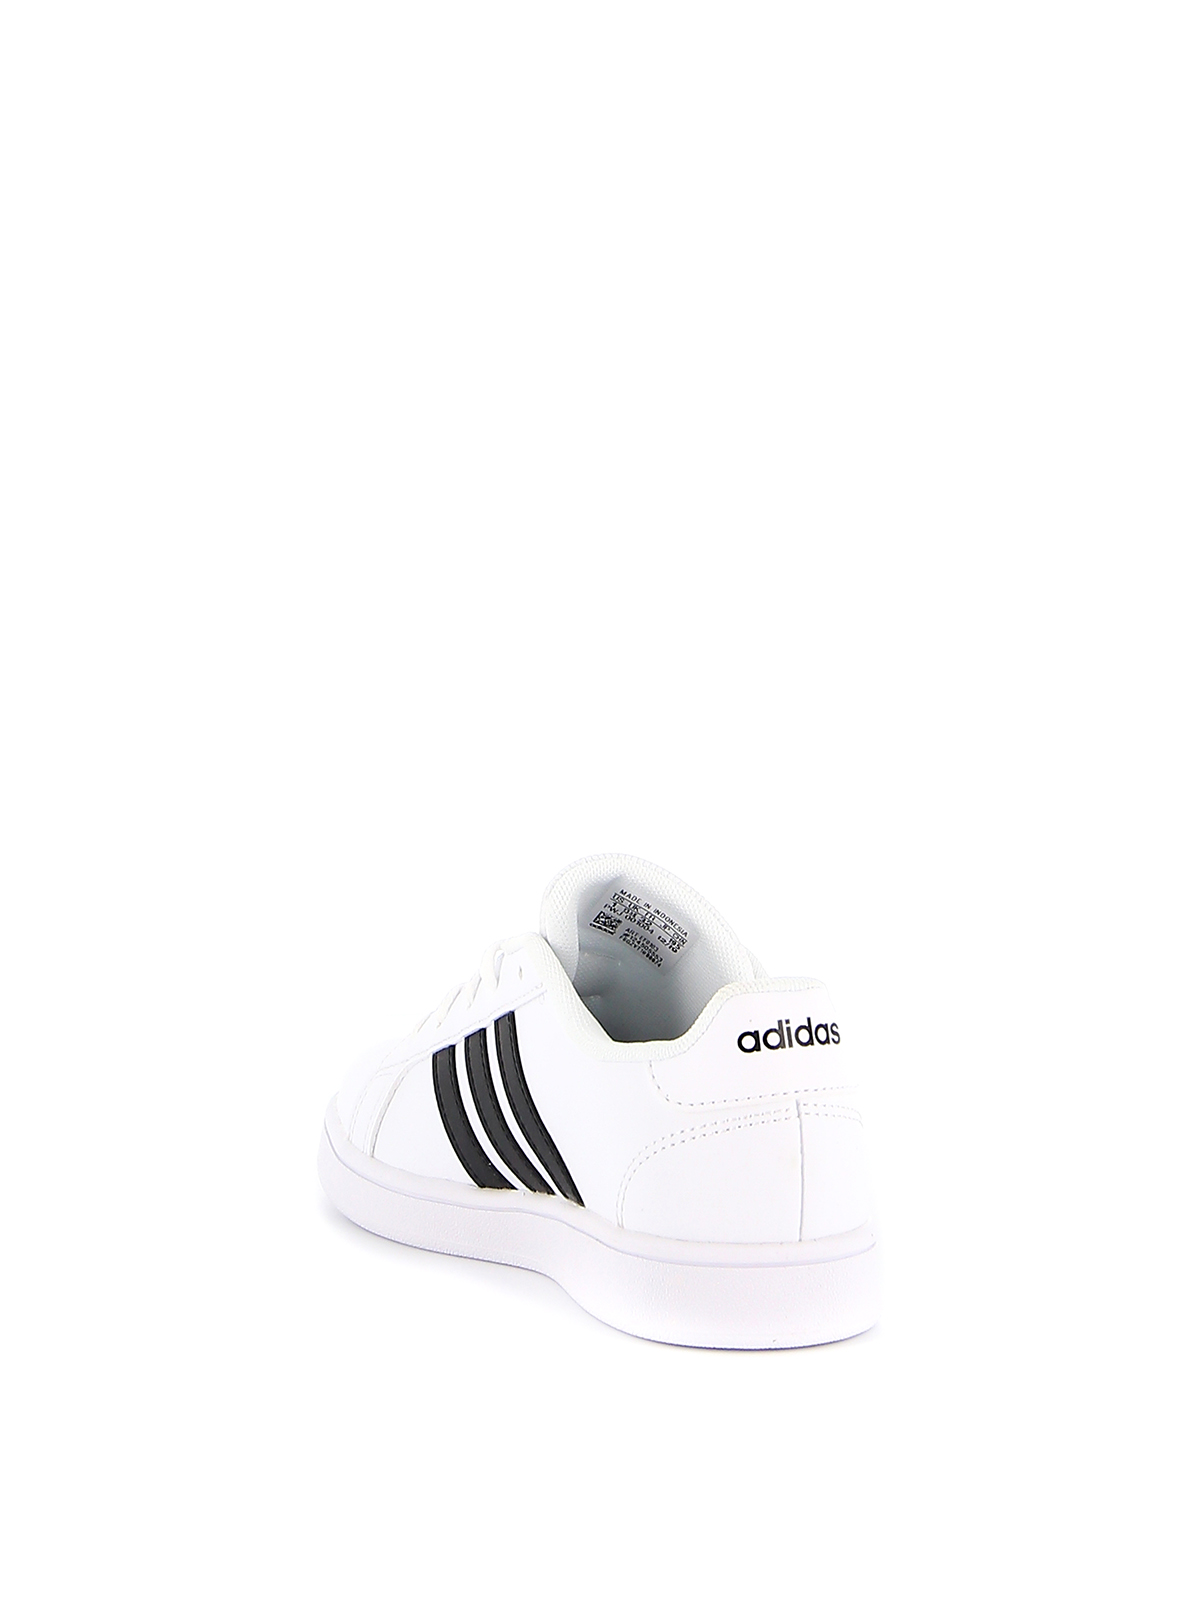 white adidas trainers with black stripes